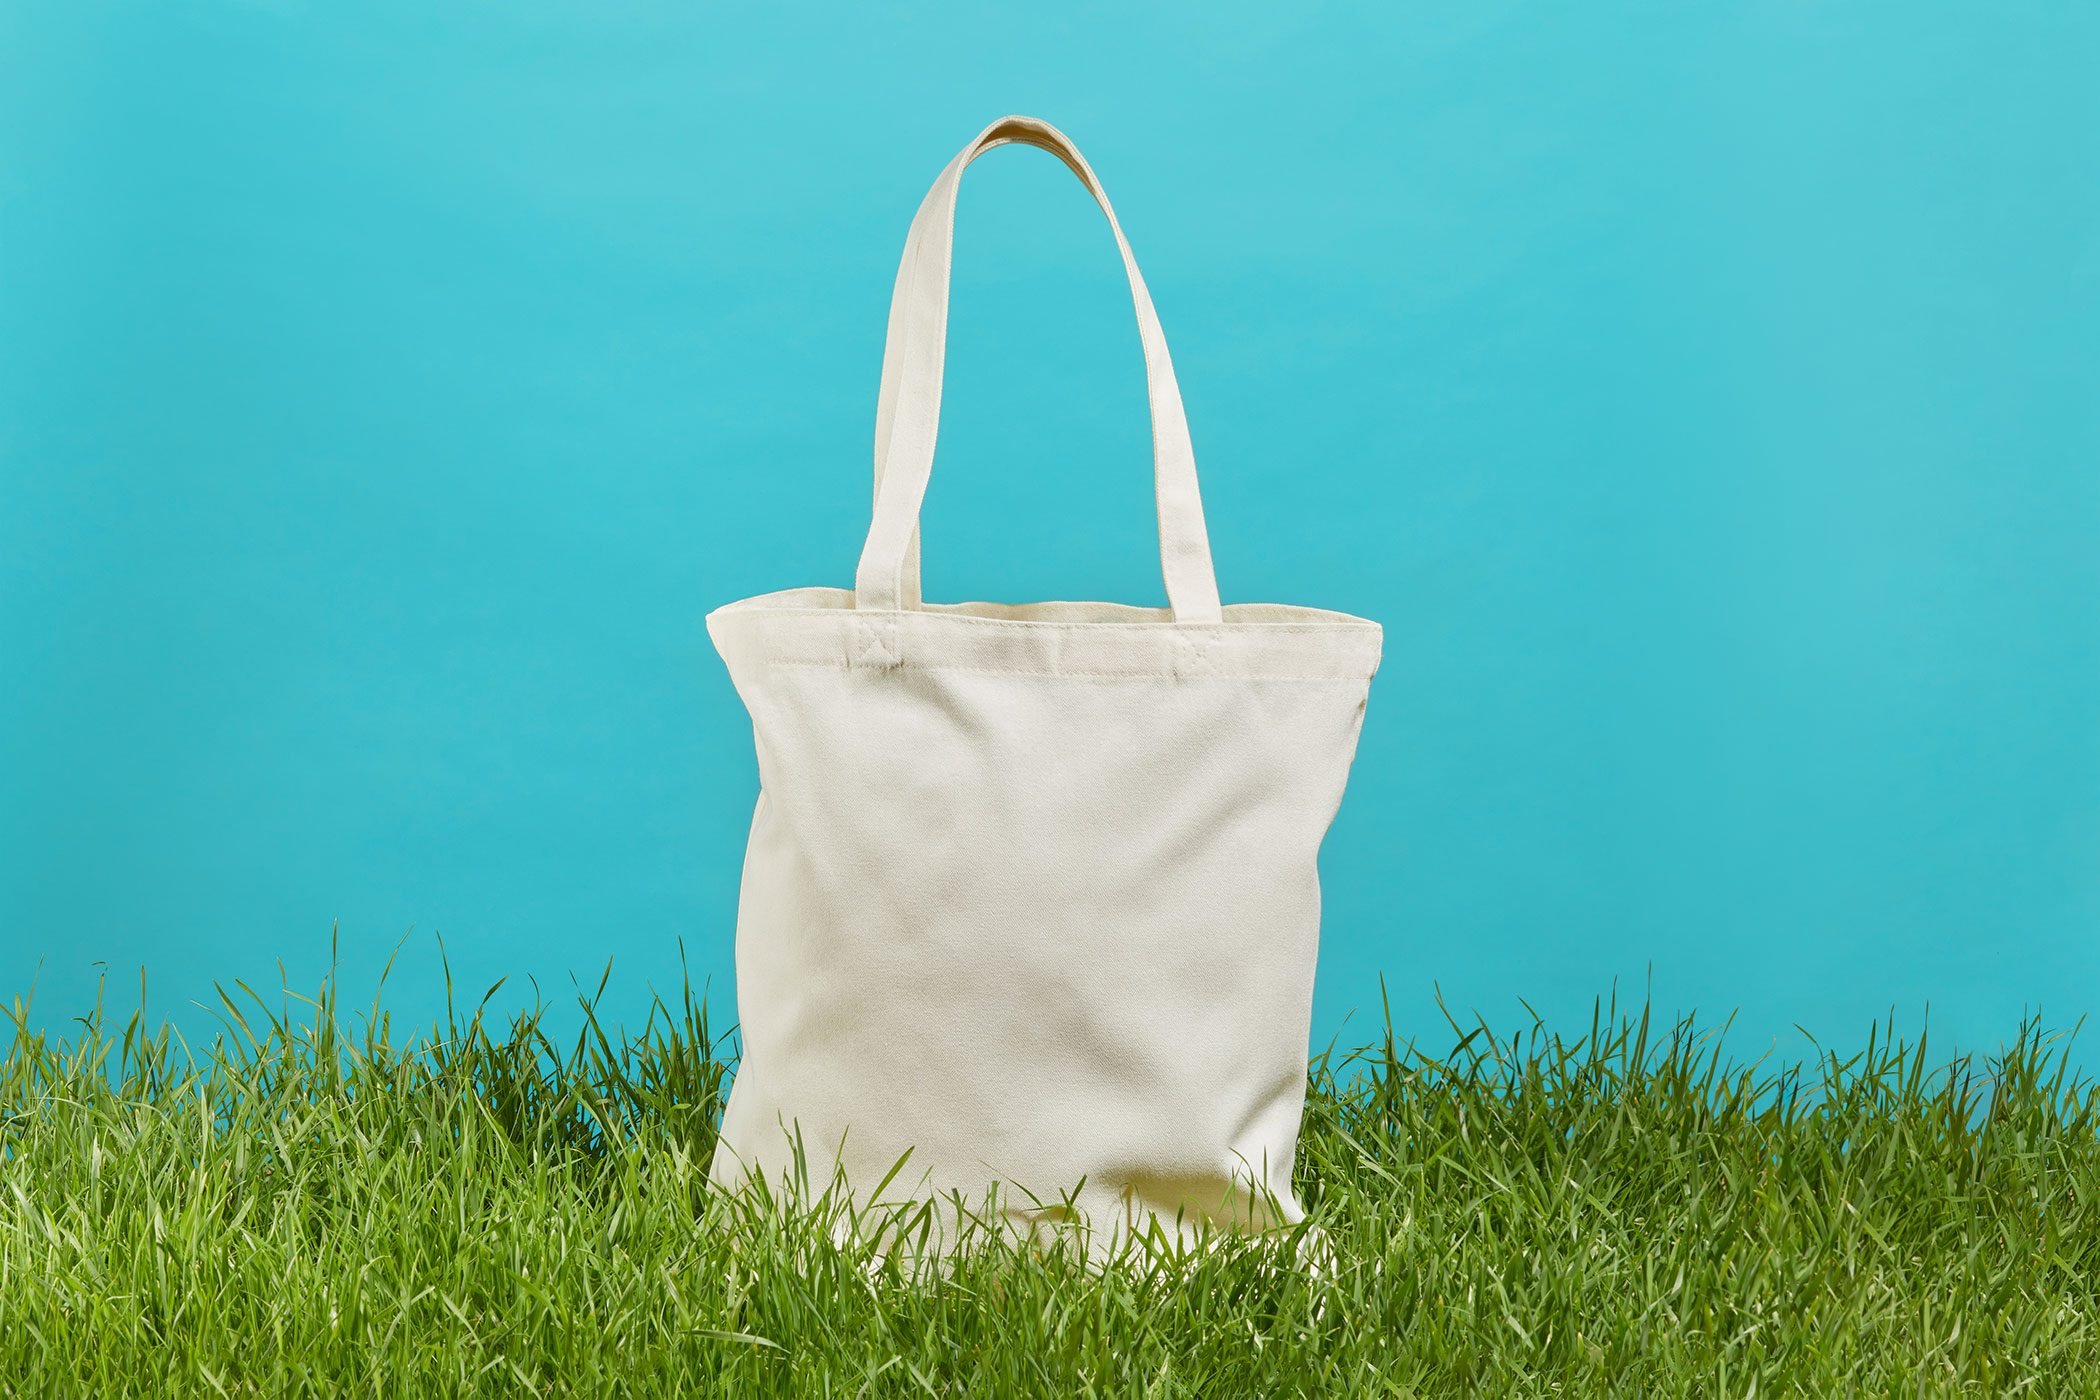 Are Reusable Bags Bad for the Environment? | Eco-Friendly Tote Bags